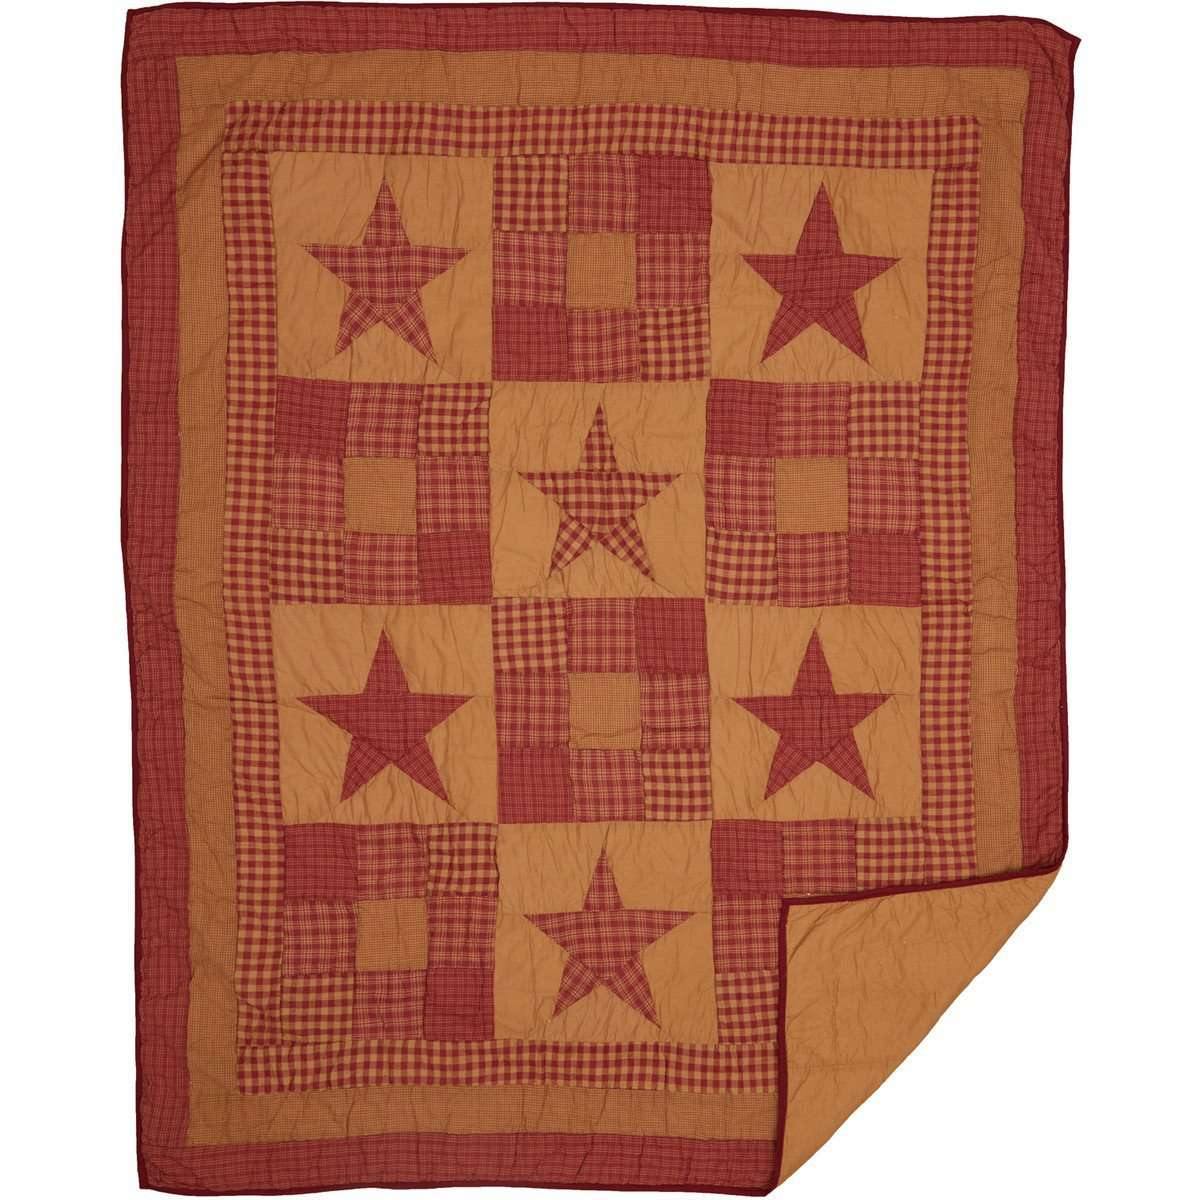 Ninepatch Star Quilted Throw 60x50  VHC Brands Online